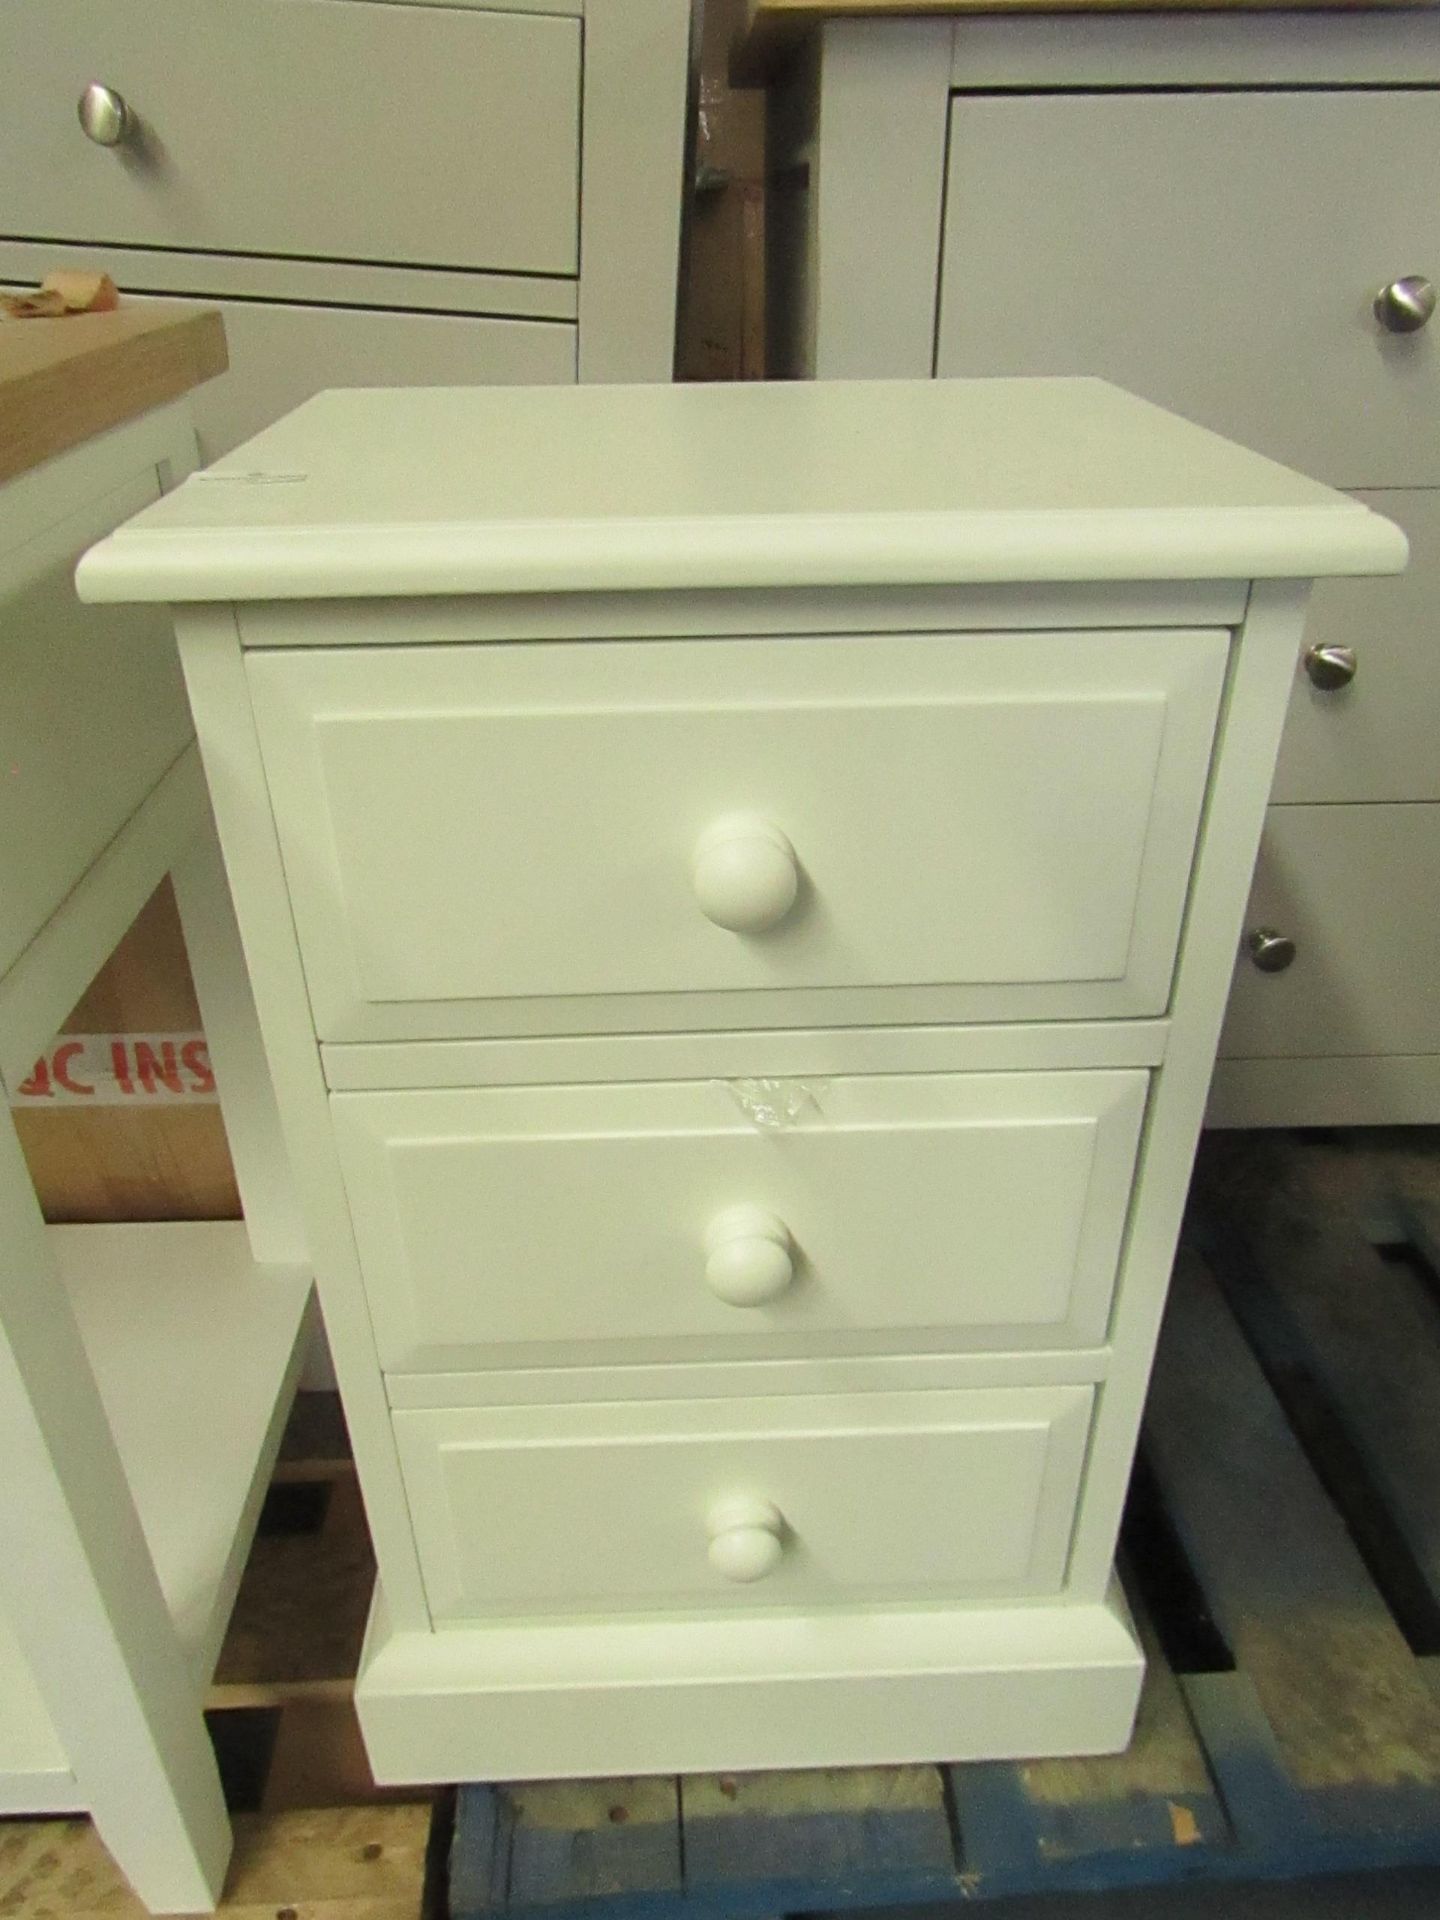 Cotswold Company Burford Ivory 3 Drawer Bedside RRP Â£125.00 - This item looks to be in good